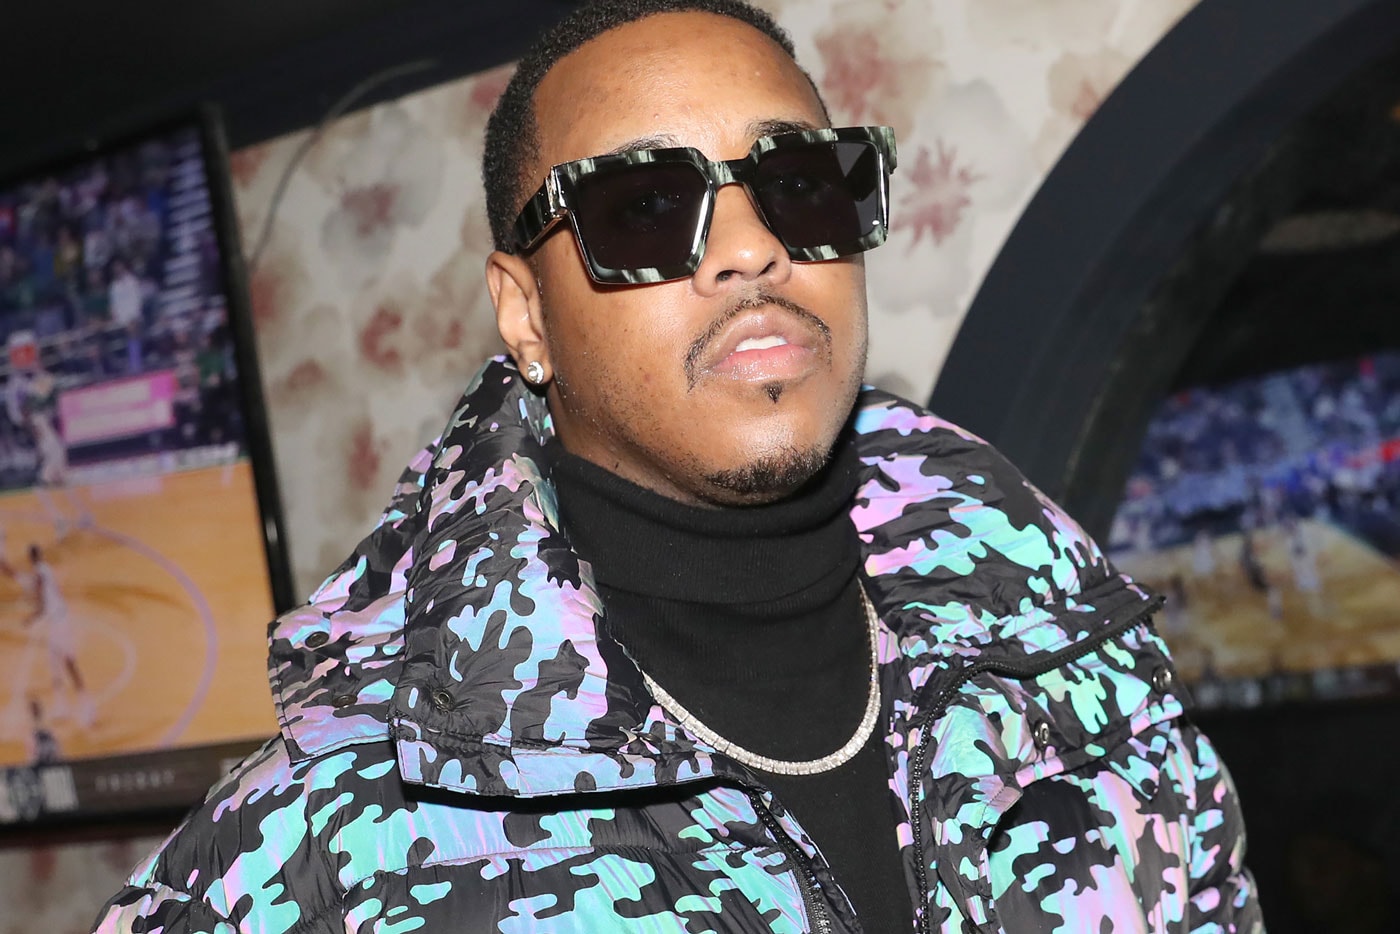 Jeremih to Def Jam: "Y'all Don't Deserve My Voice"